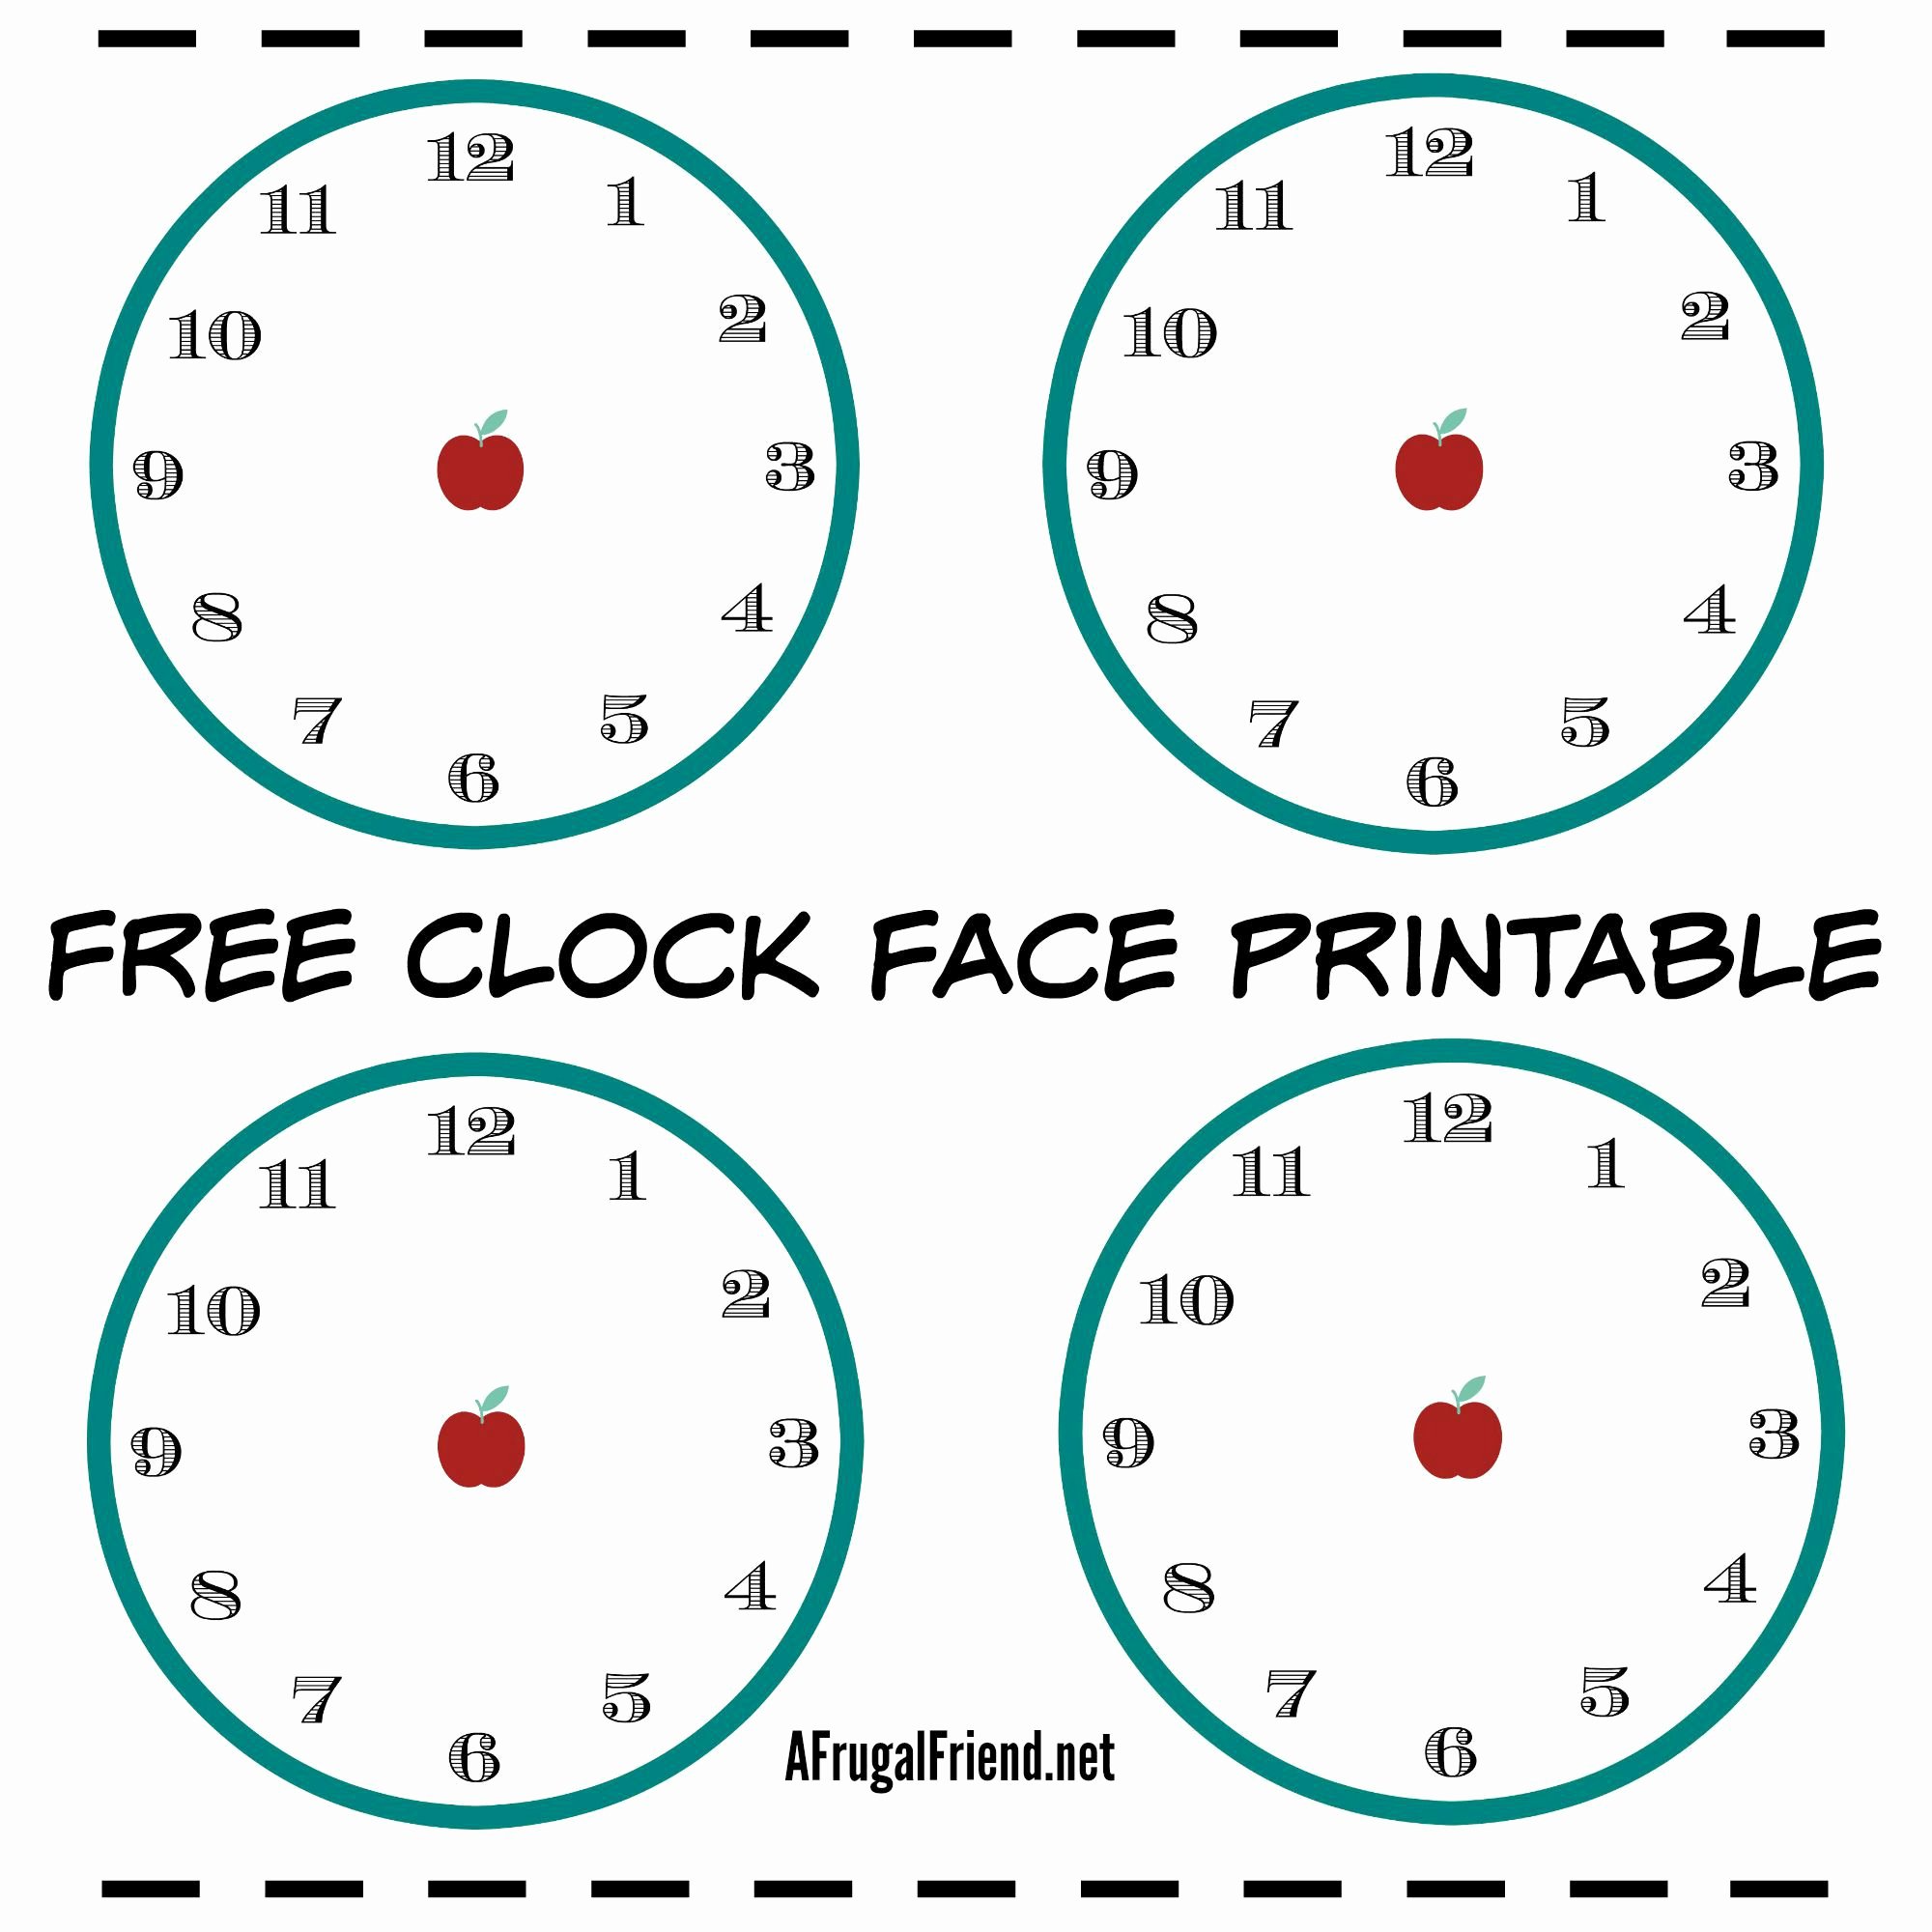 Free Printable Clock Faces Best Of Free Clock Face Printable with A Twist for Kids